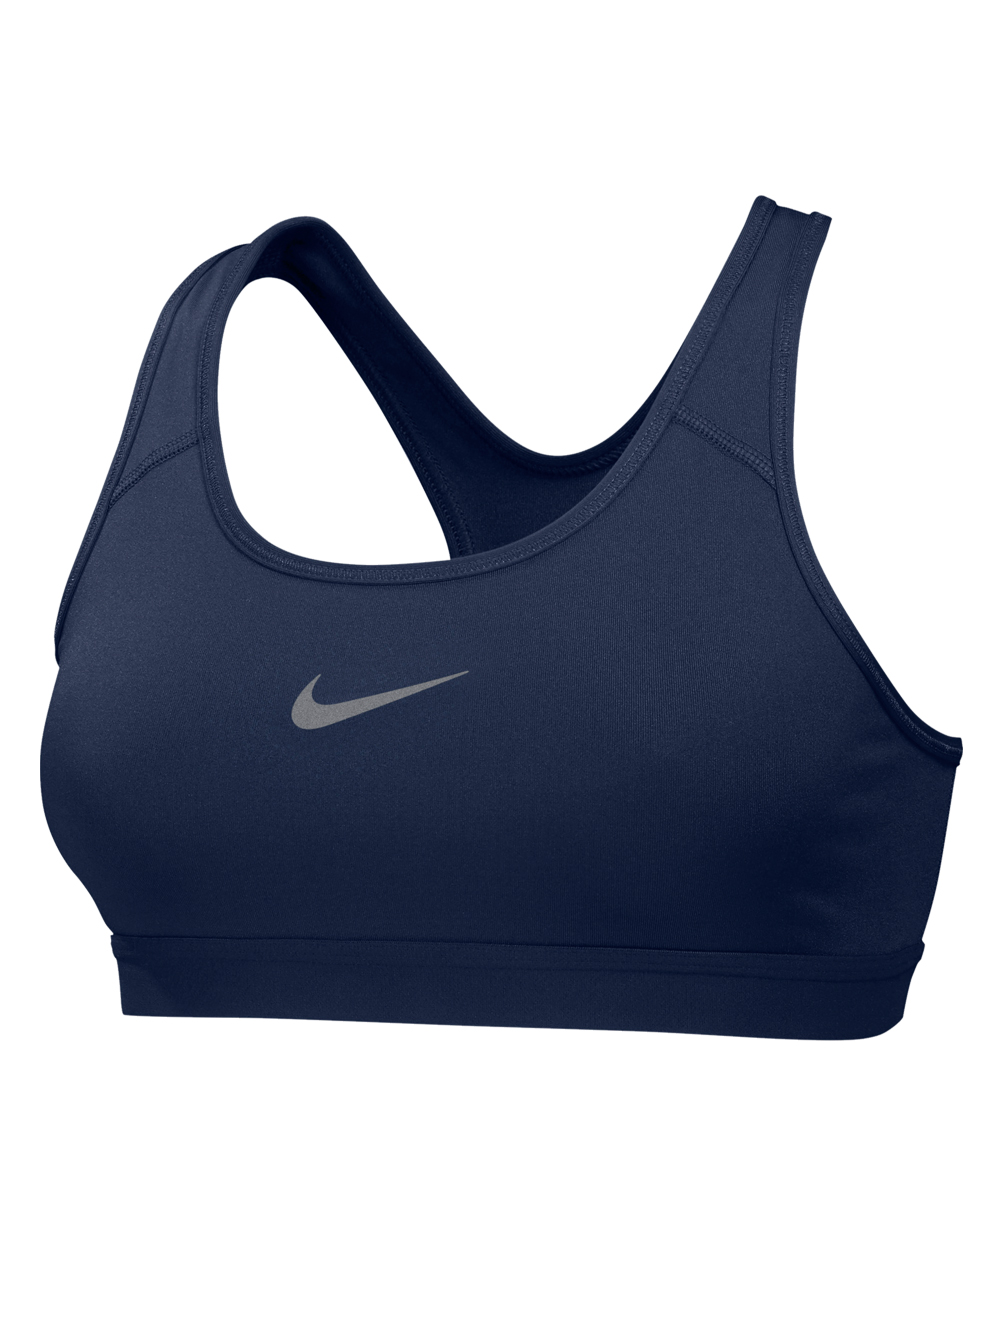 Nike Pro Classic Sports Bra | Midwest Volleyball Warehouse